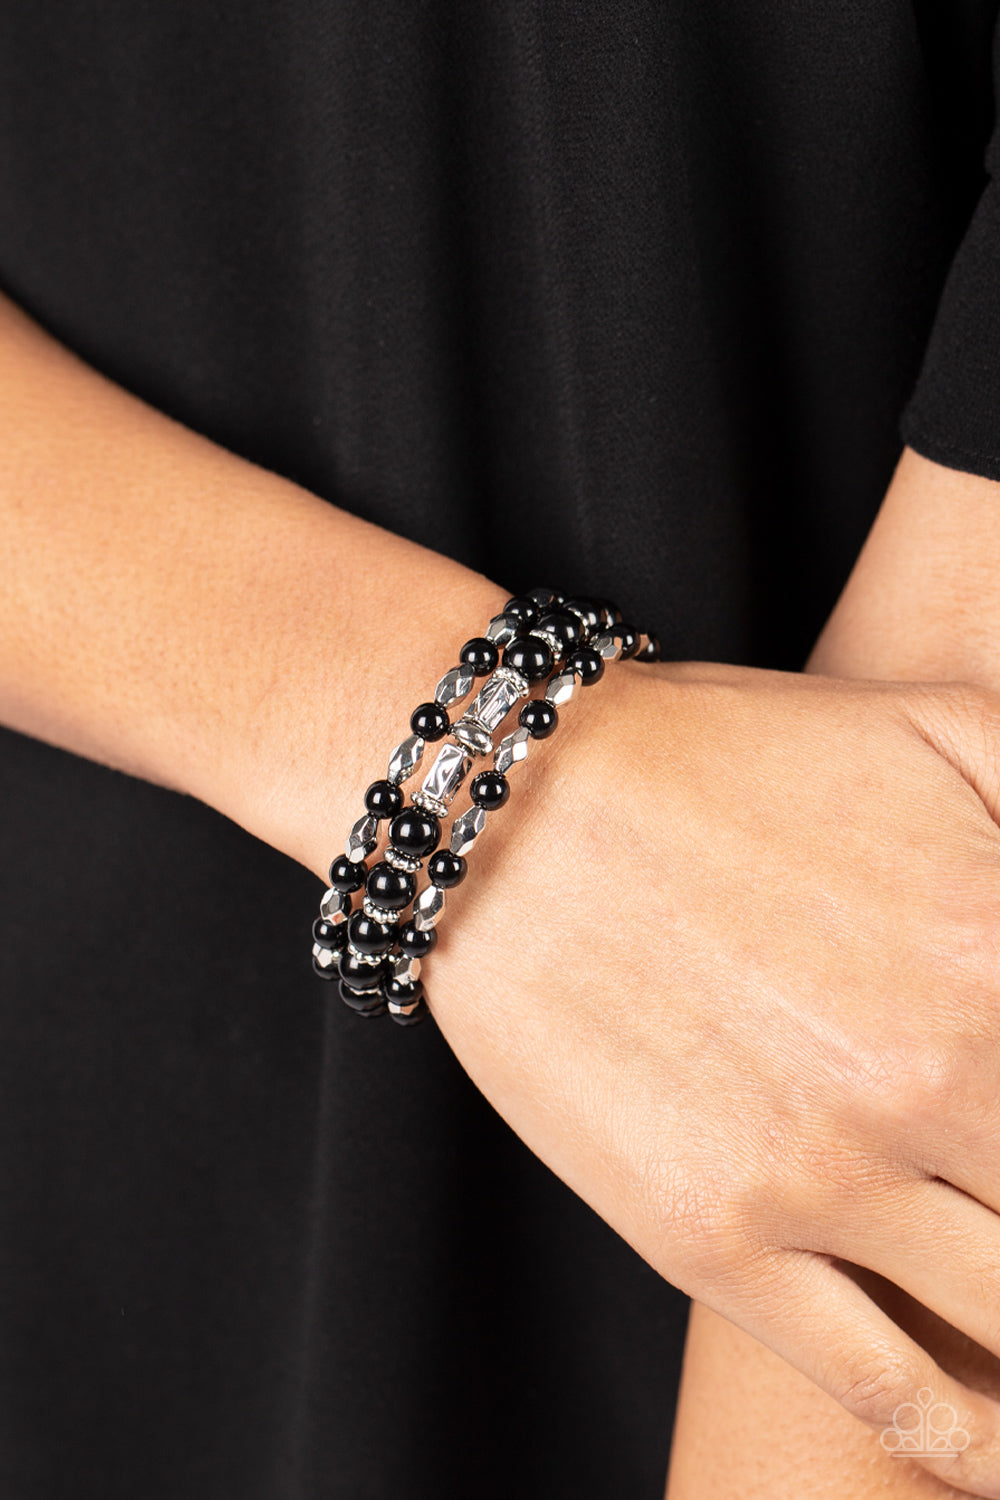 Colorfully Coiled - Black Beads, Faceted Silver Beads, & Silver Ring Paparazzi Coil Bracelet